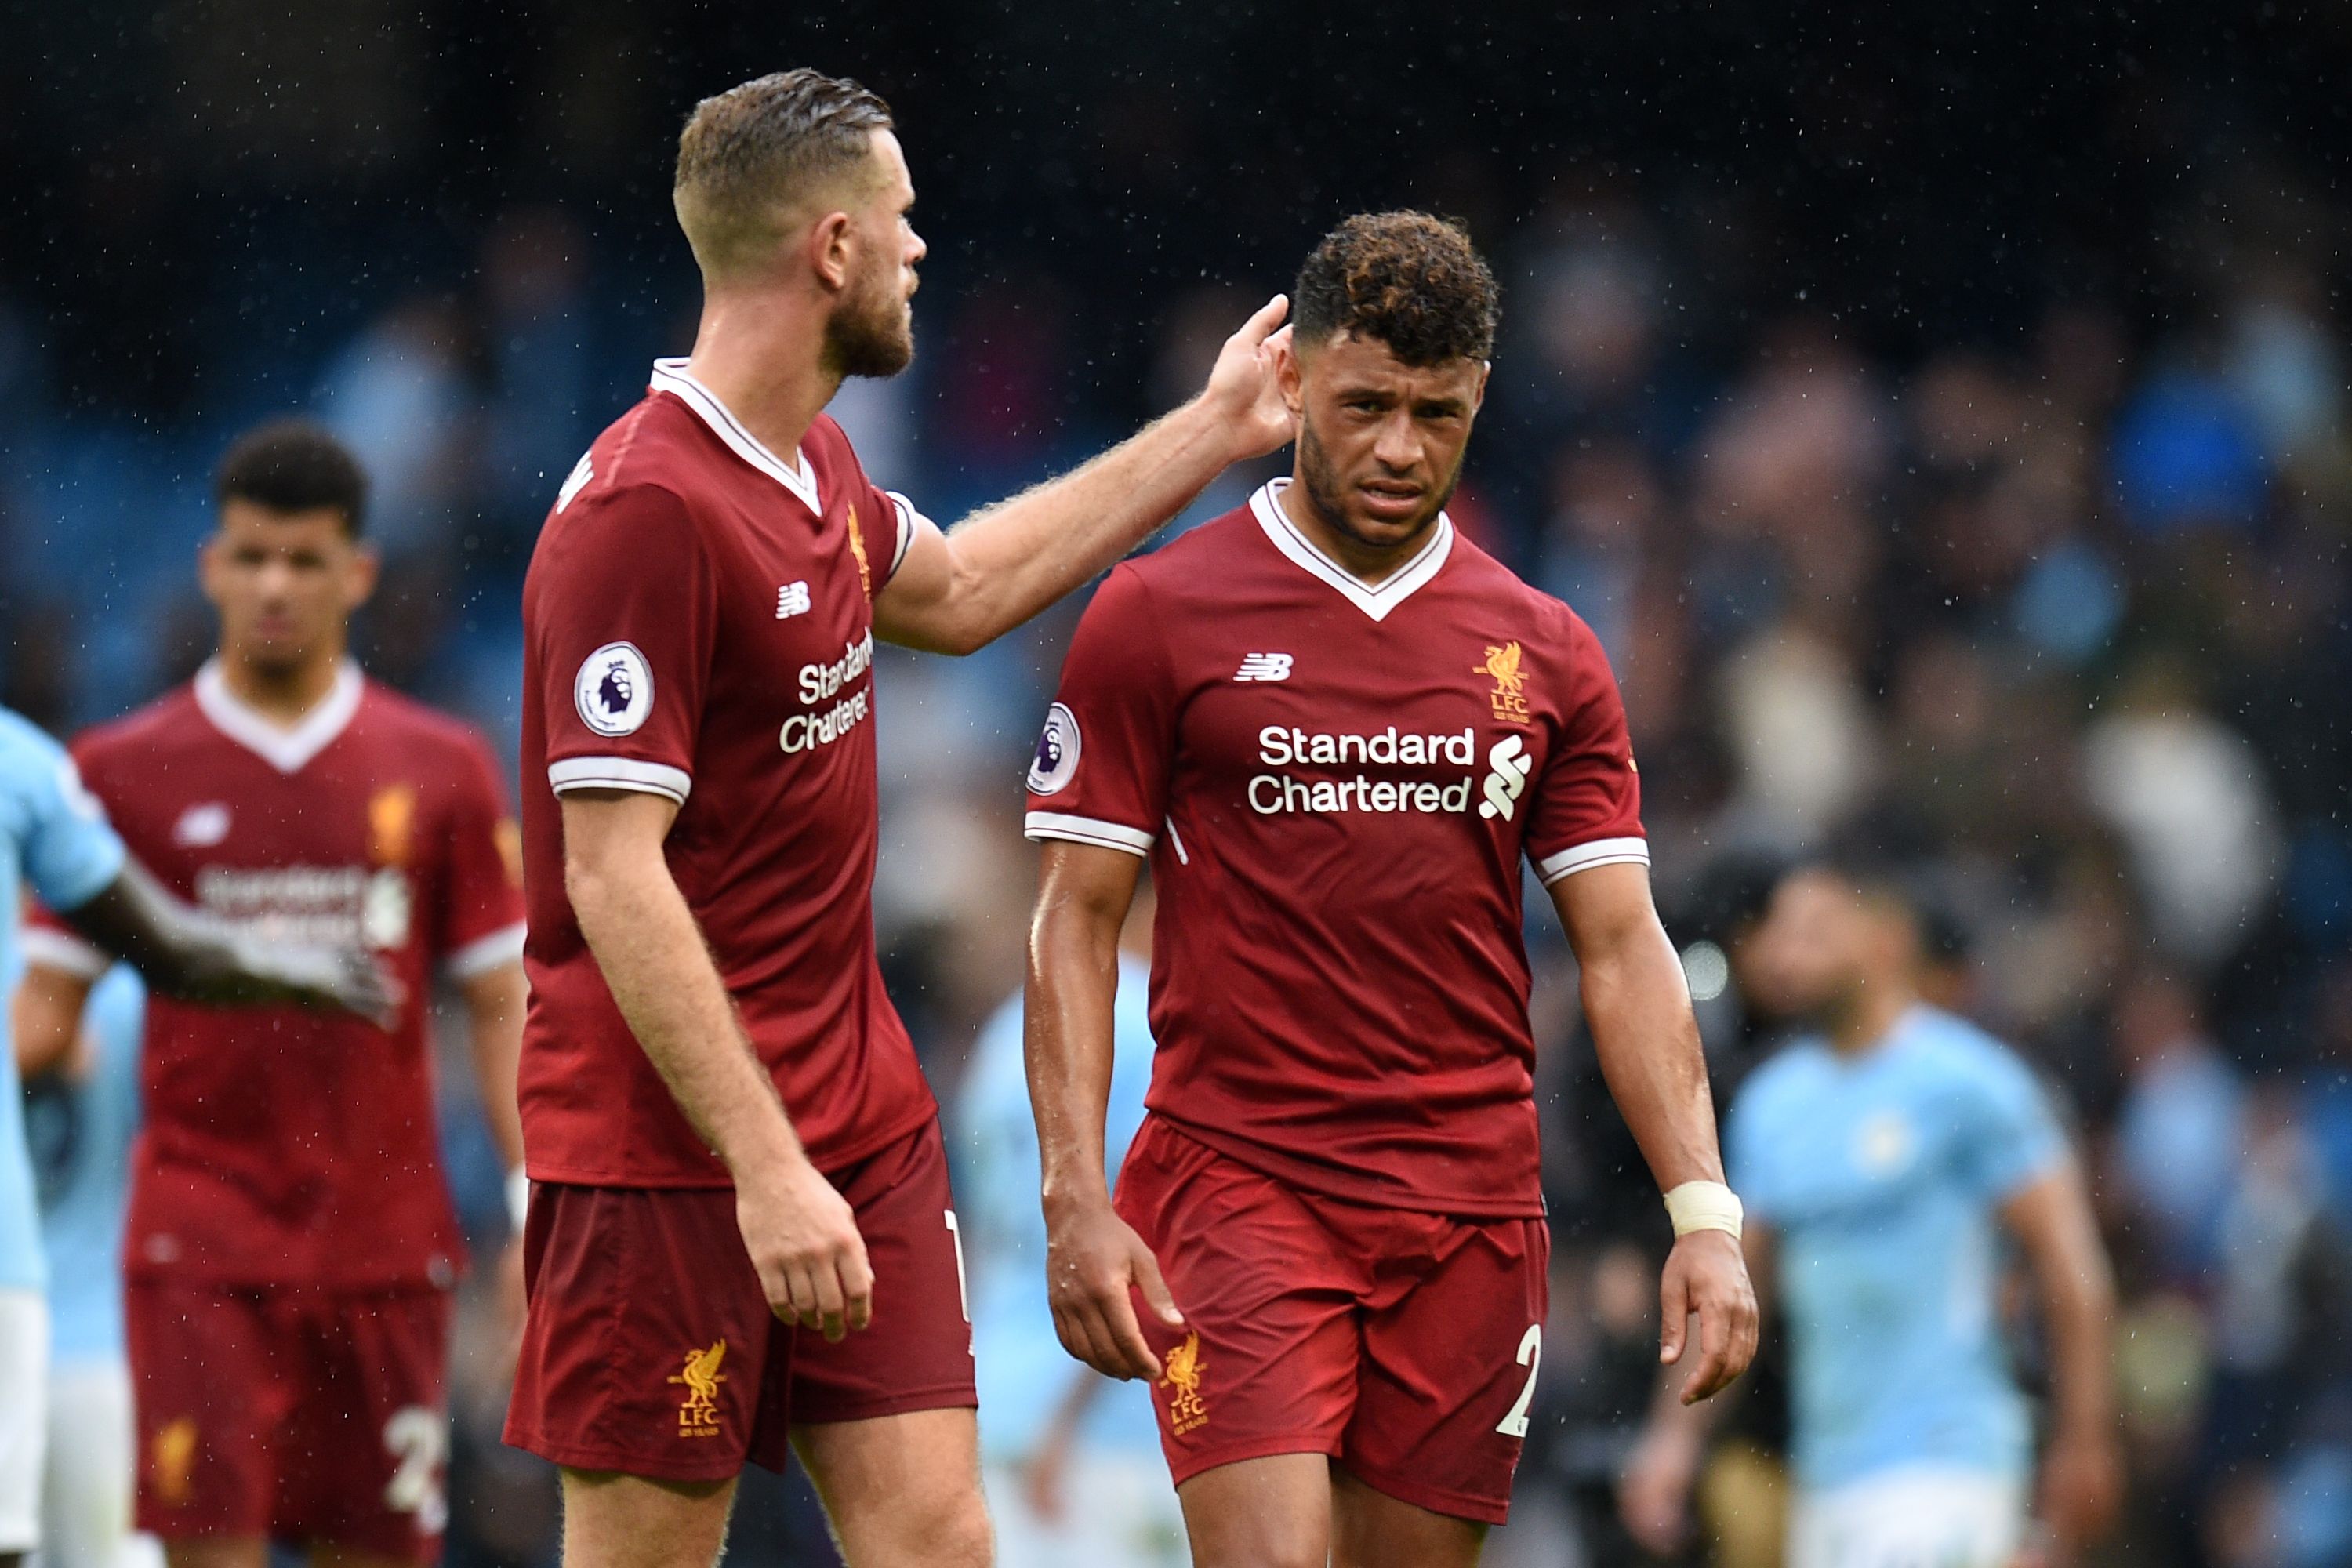 Liverpool's English midfielder Alex Oxlade-Chamberlain (R) reacts with Liverpool's English midfielder Jordan Henderson at the final whistle in the English Premier League football match between Manchester City and Liverpool at the Etihad Stadium in Manchester, north west England, on September 9, 2017.
Manchester City won the game 5-0. / AFP PHOTO / Oli SCARFF / RESTRICTED TO EDITORIAL USE. No use with unauthorized audio, video, data, fixture lists, club/league logos or 'live' services. Online in-match use limited to 75 images, no video emulation. No use in betting, games or single club/league/player publications.  /         (Photo credit should read OLI SCARFF/AFP/Getty Images)